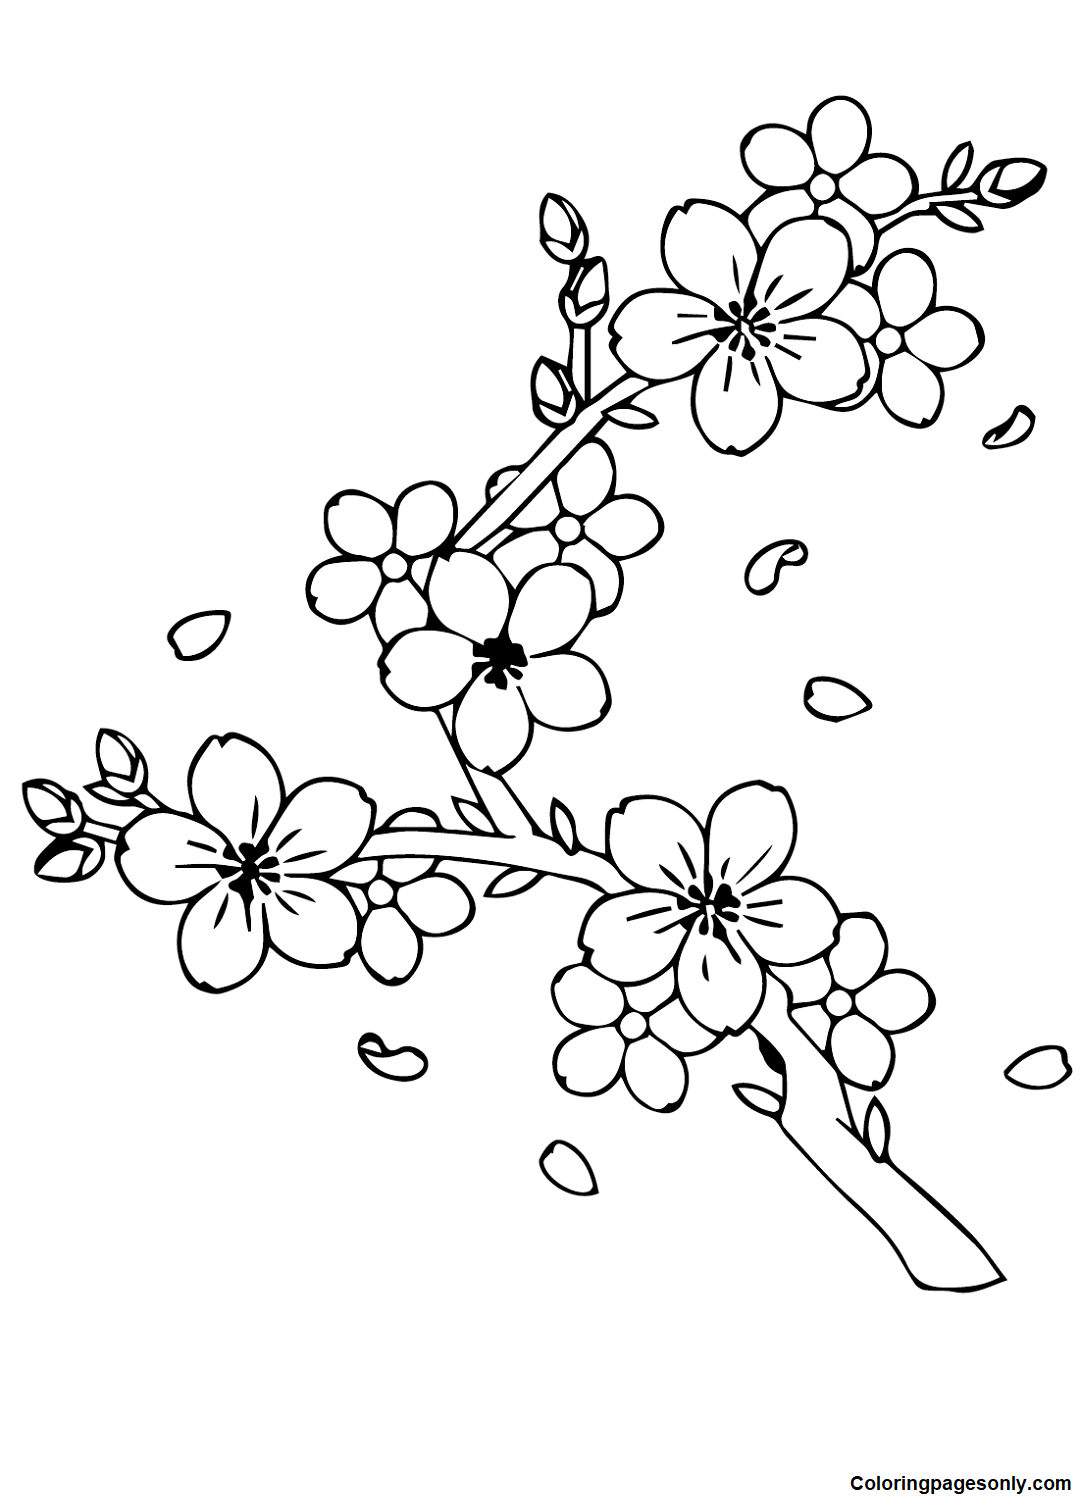 Cherry Blossom Images Coloring Page